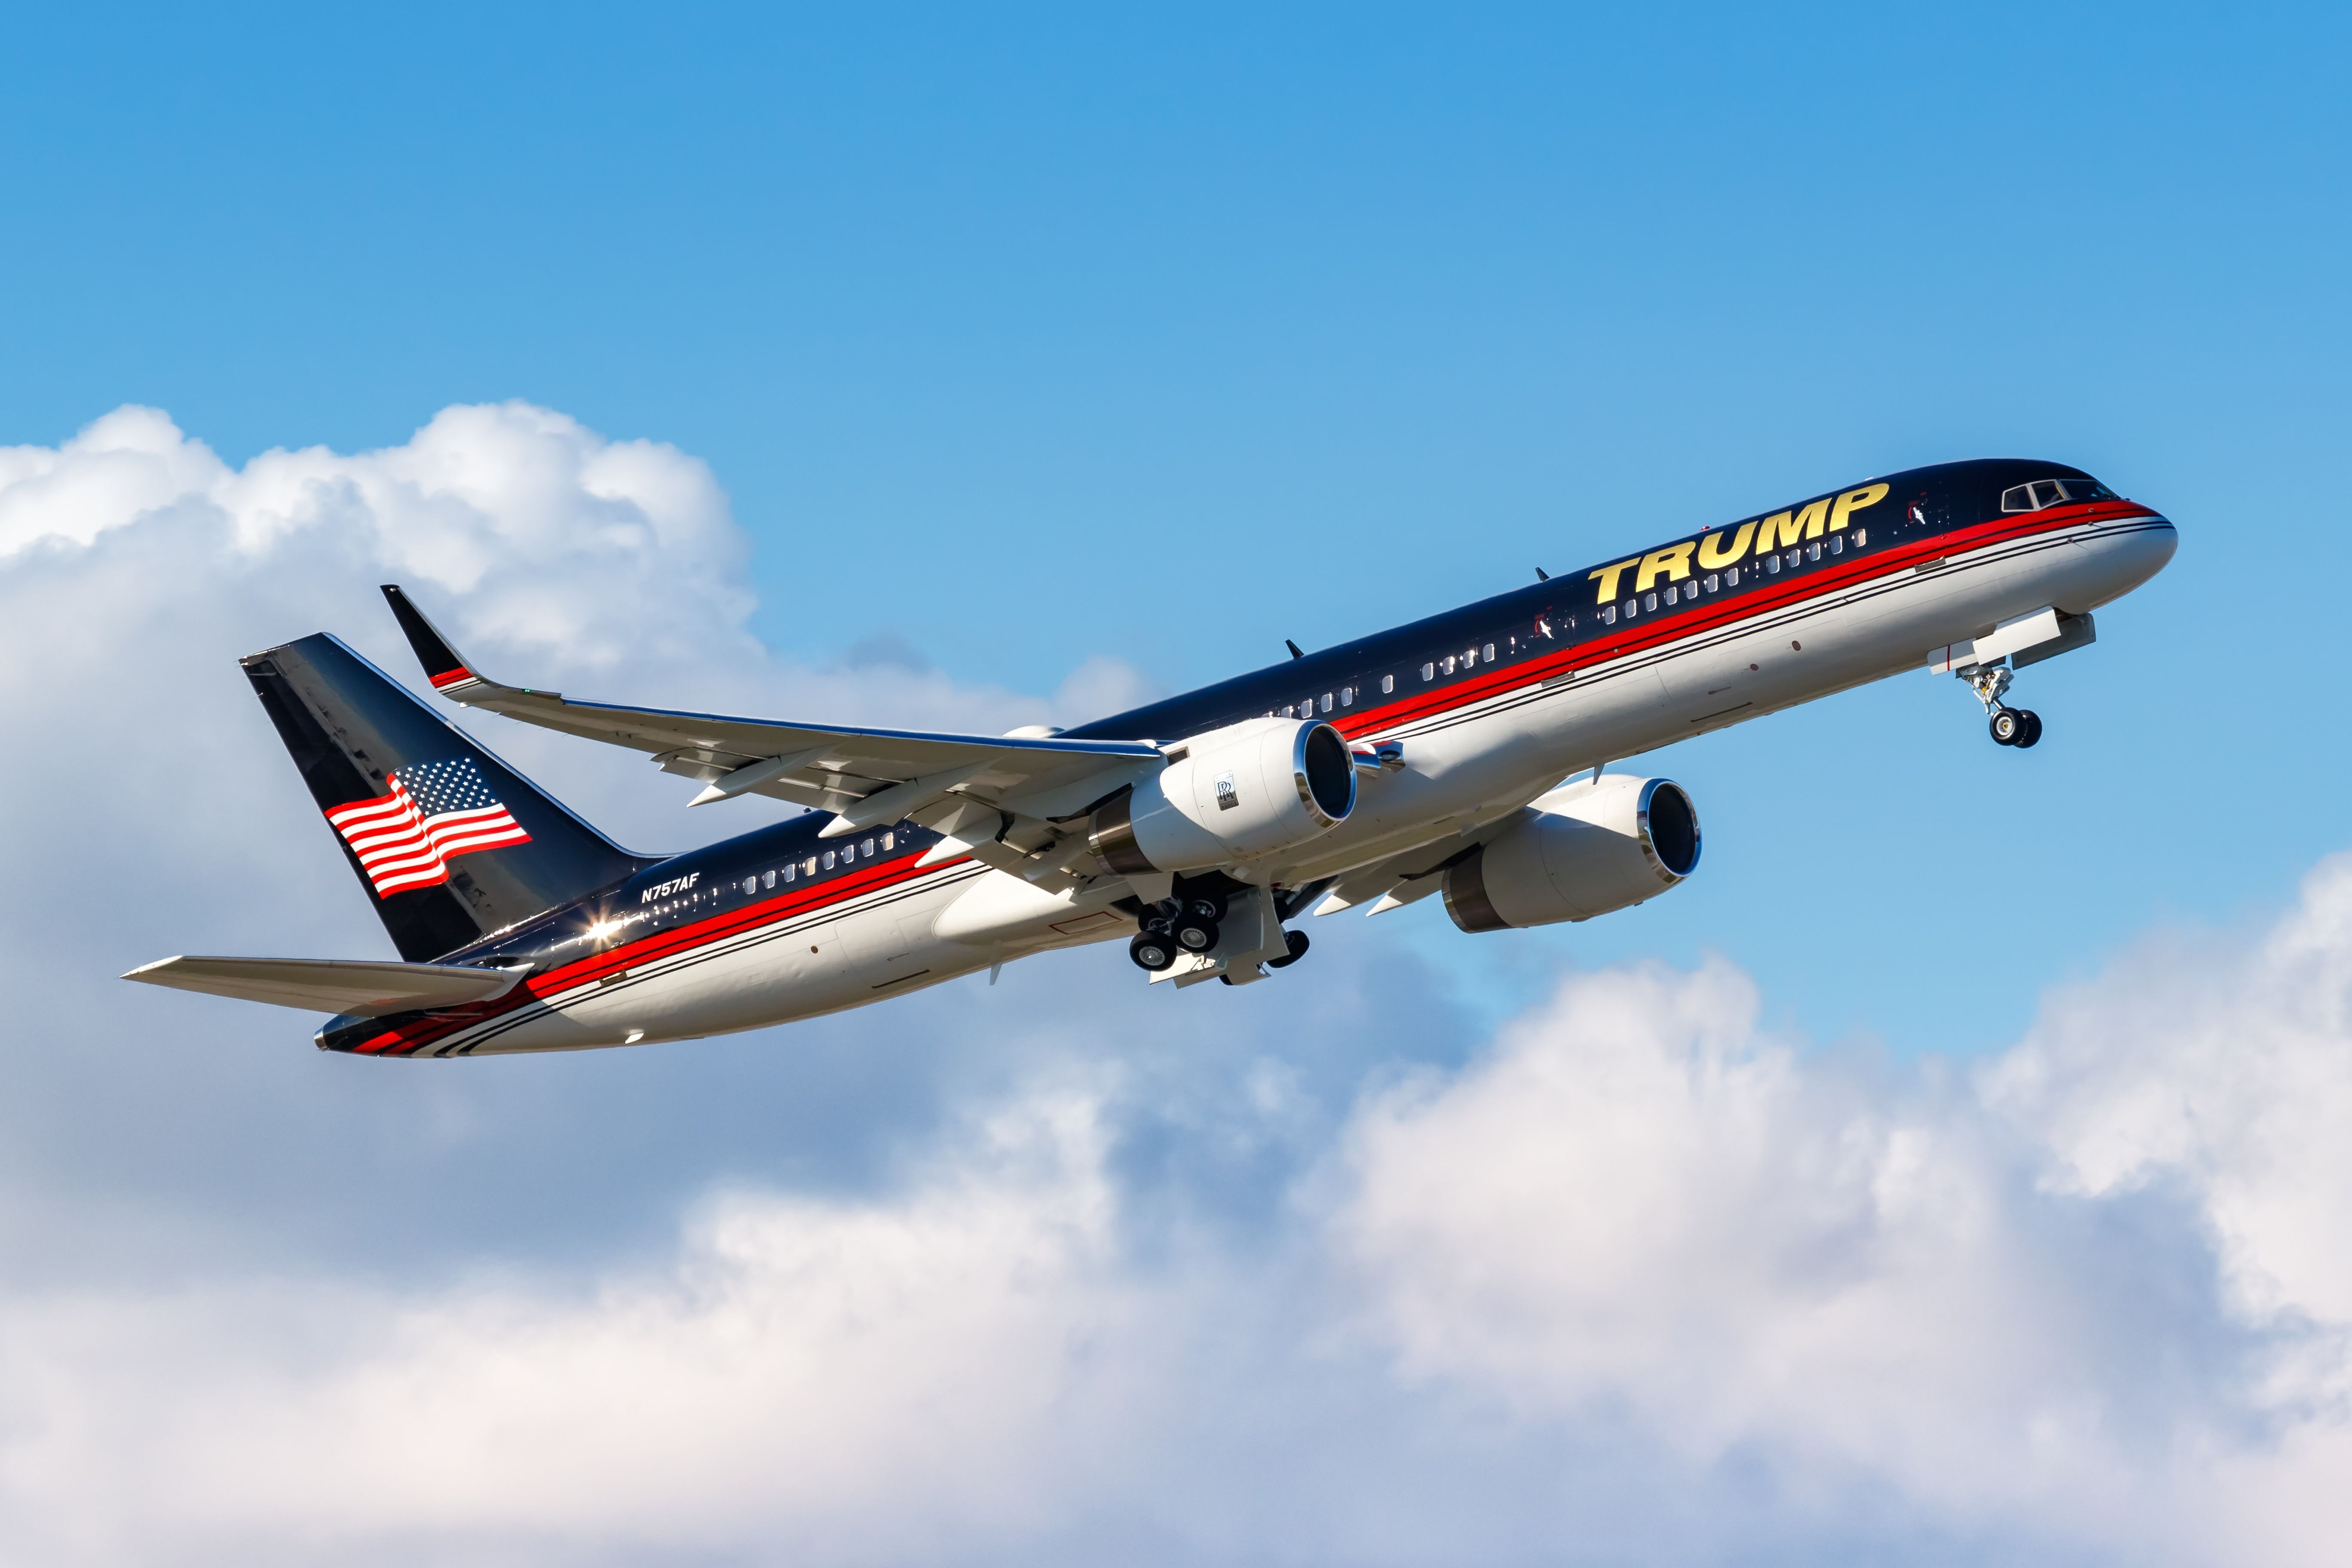 Boeing 757-200 airplane of Donald Trump at Palm Beach airport (PBI) in the United States